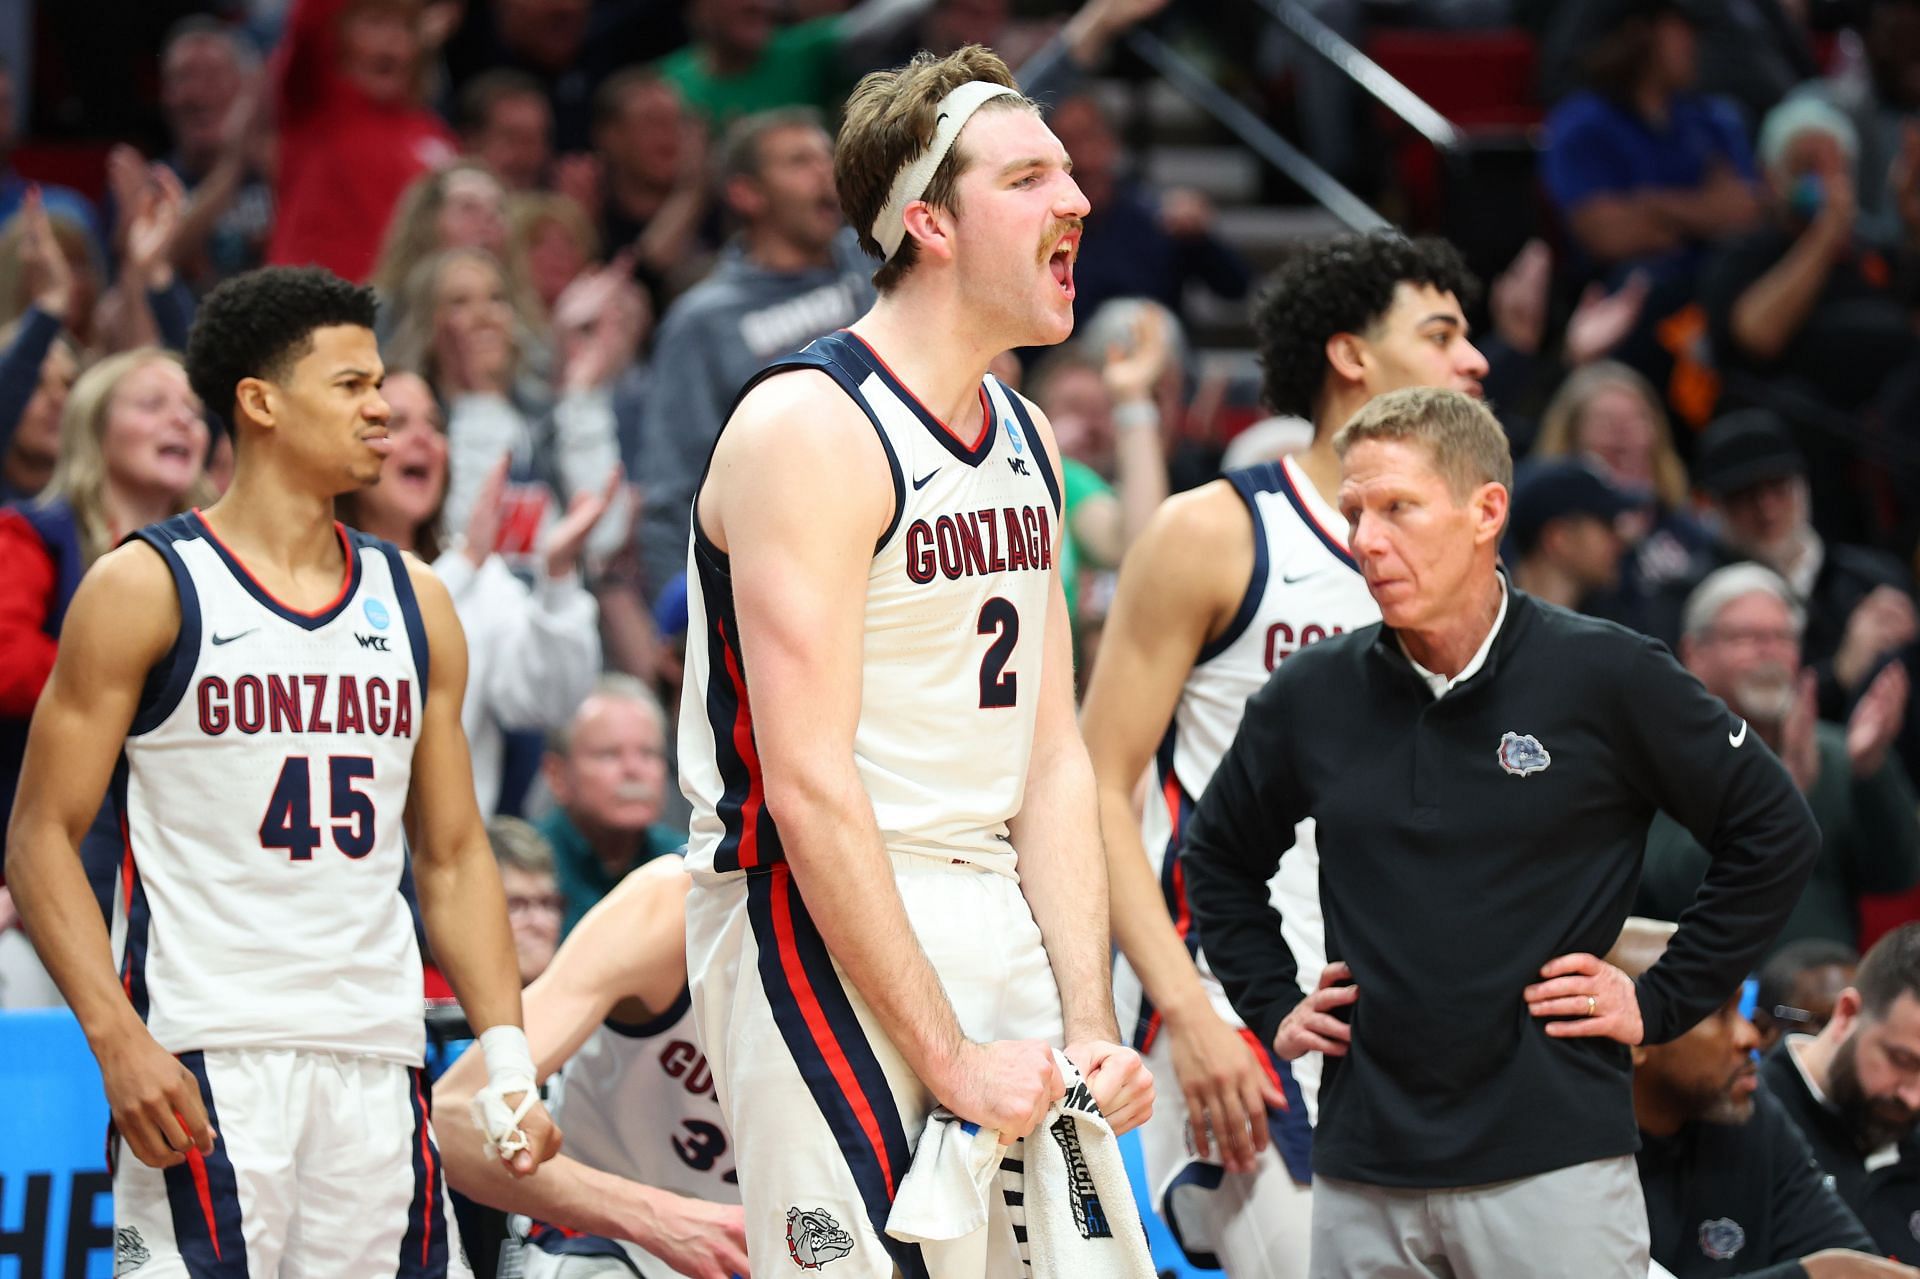 Gonzaga players are having fun as they pursue the national championship.